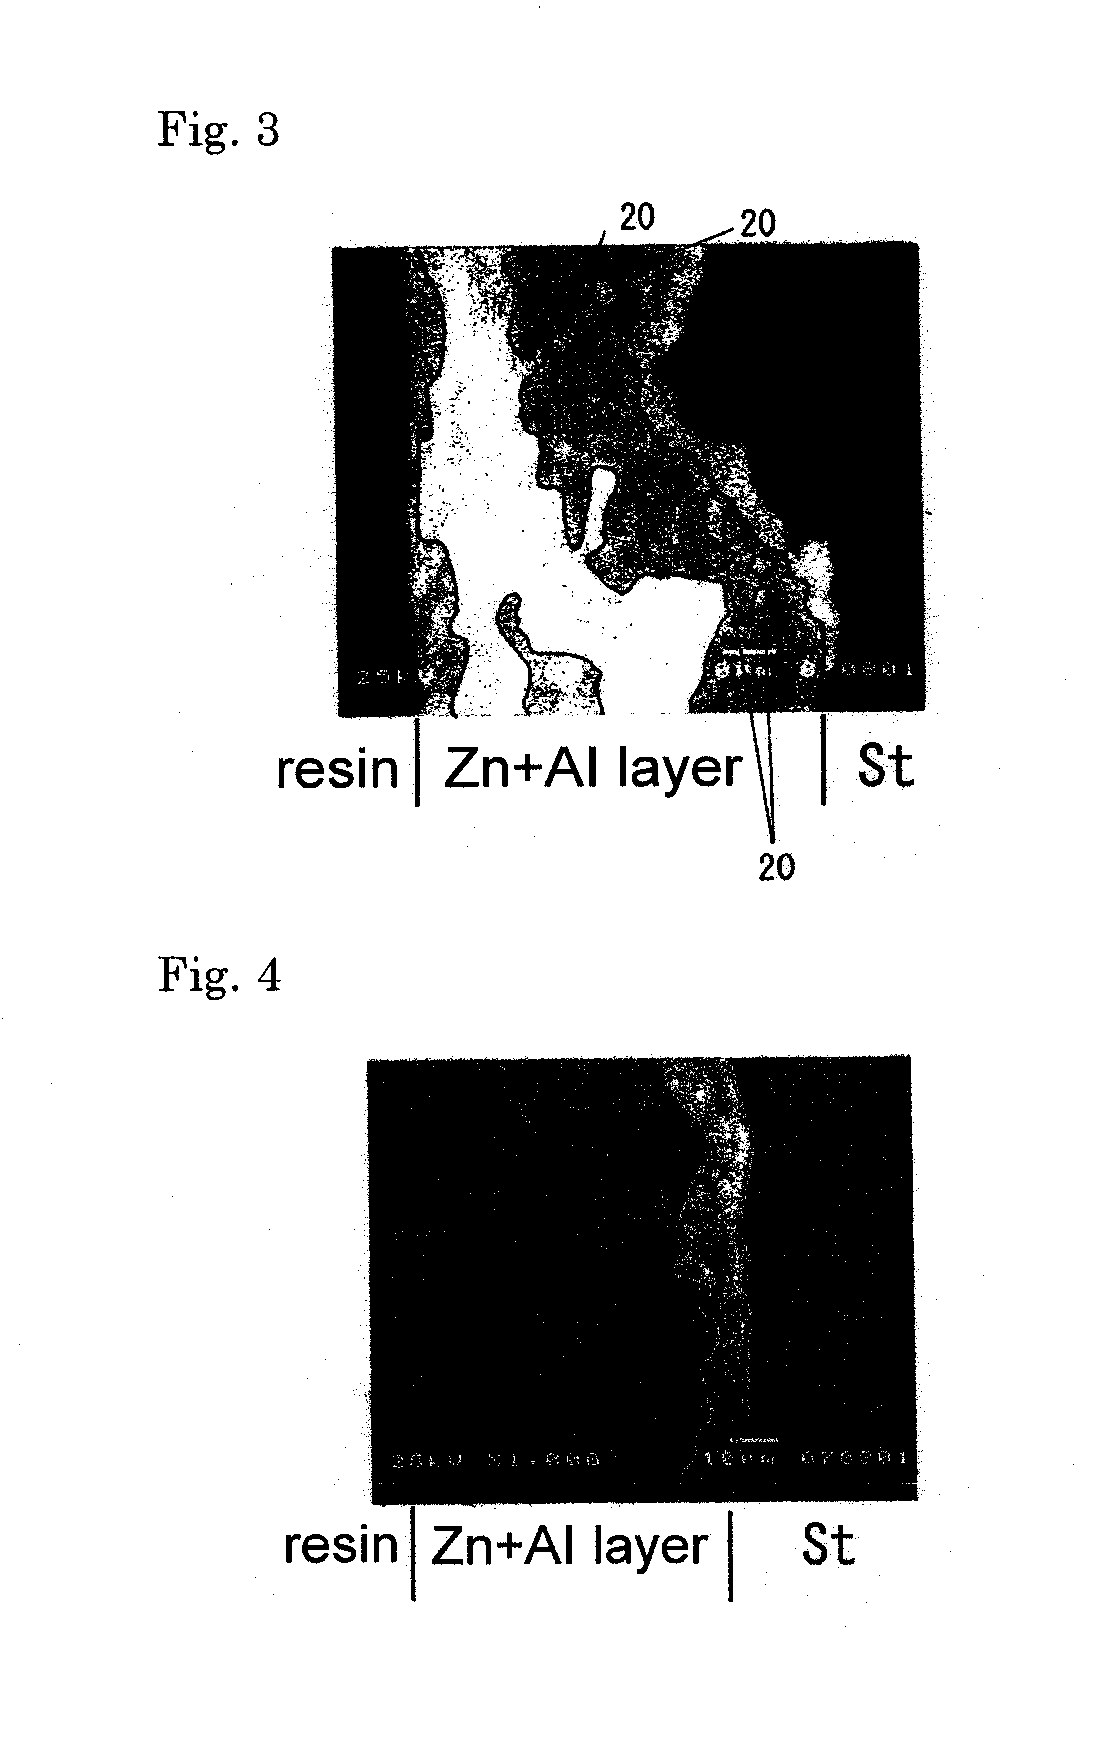 Method for producing steel pipe plated with metal by thermal spraying